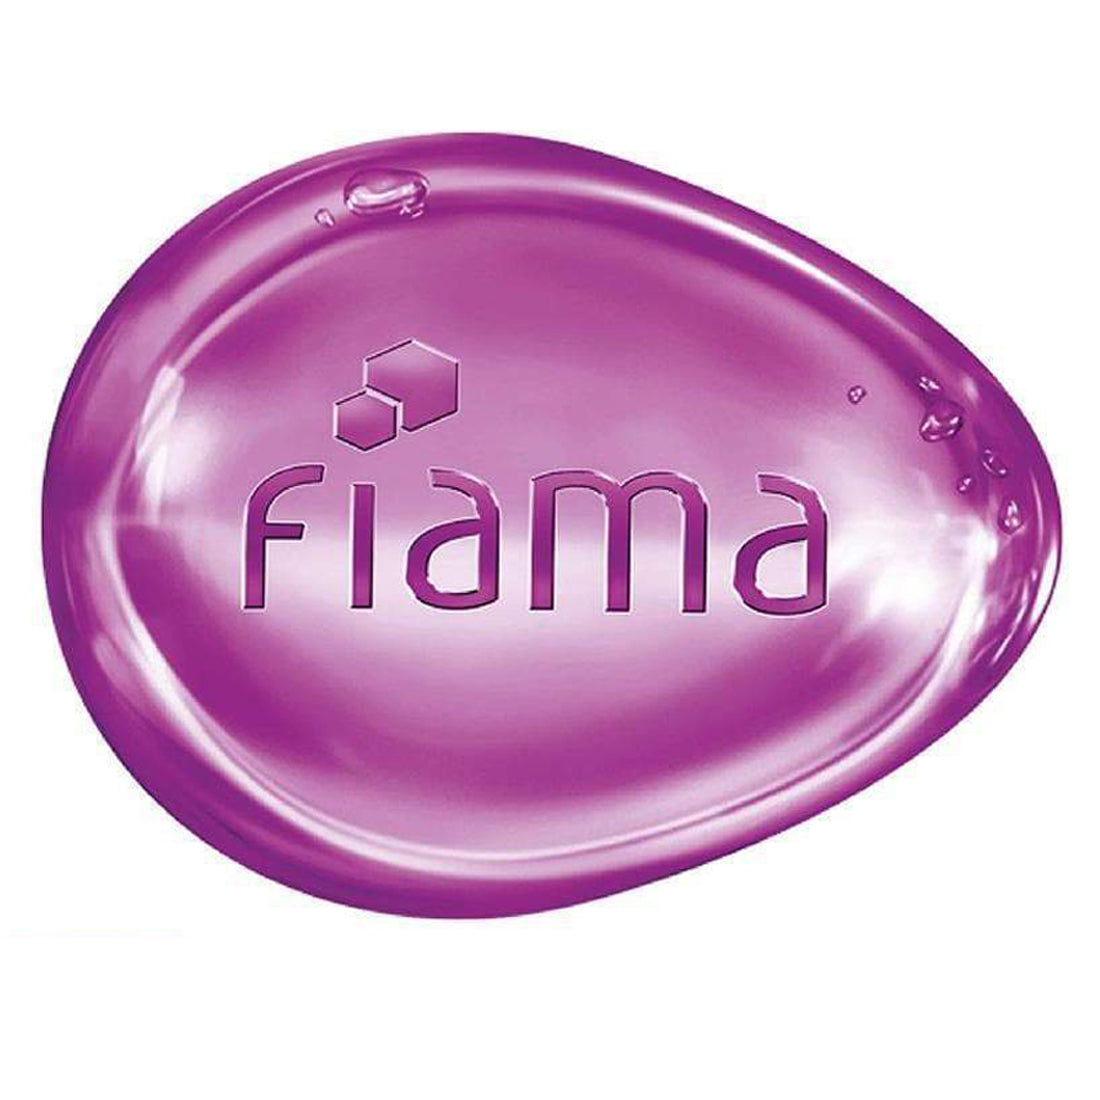 Fiama Gel Bar Blackcurrant And Bearberry Radiant Glow 125gm Pack Of 3